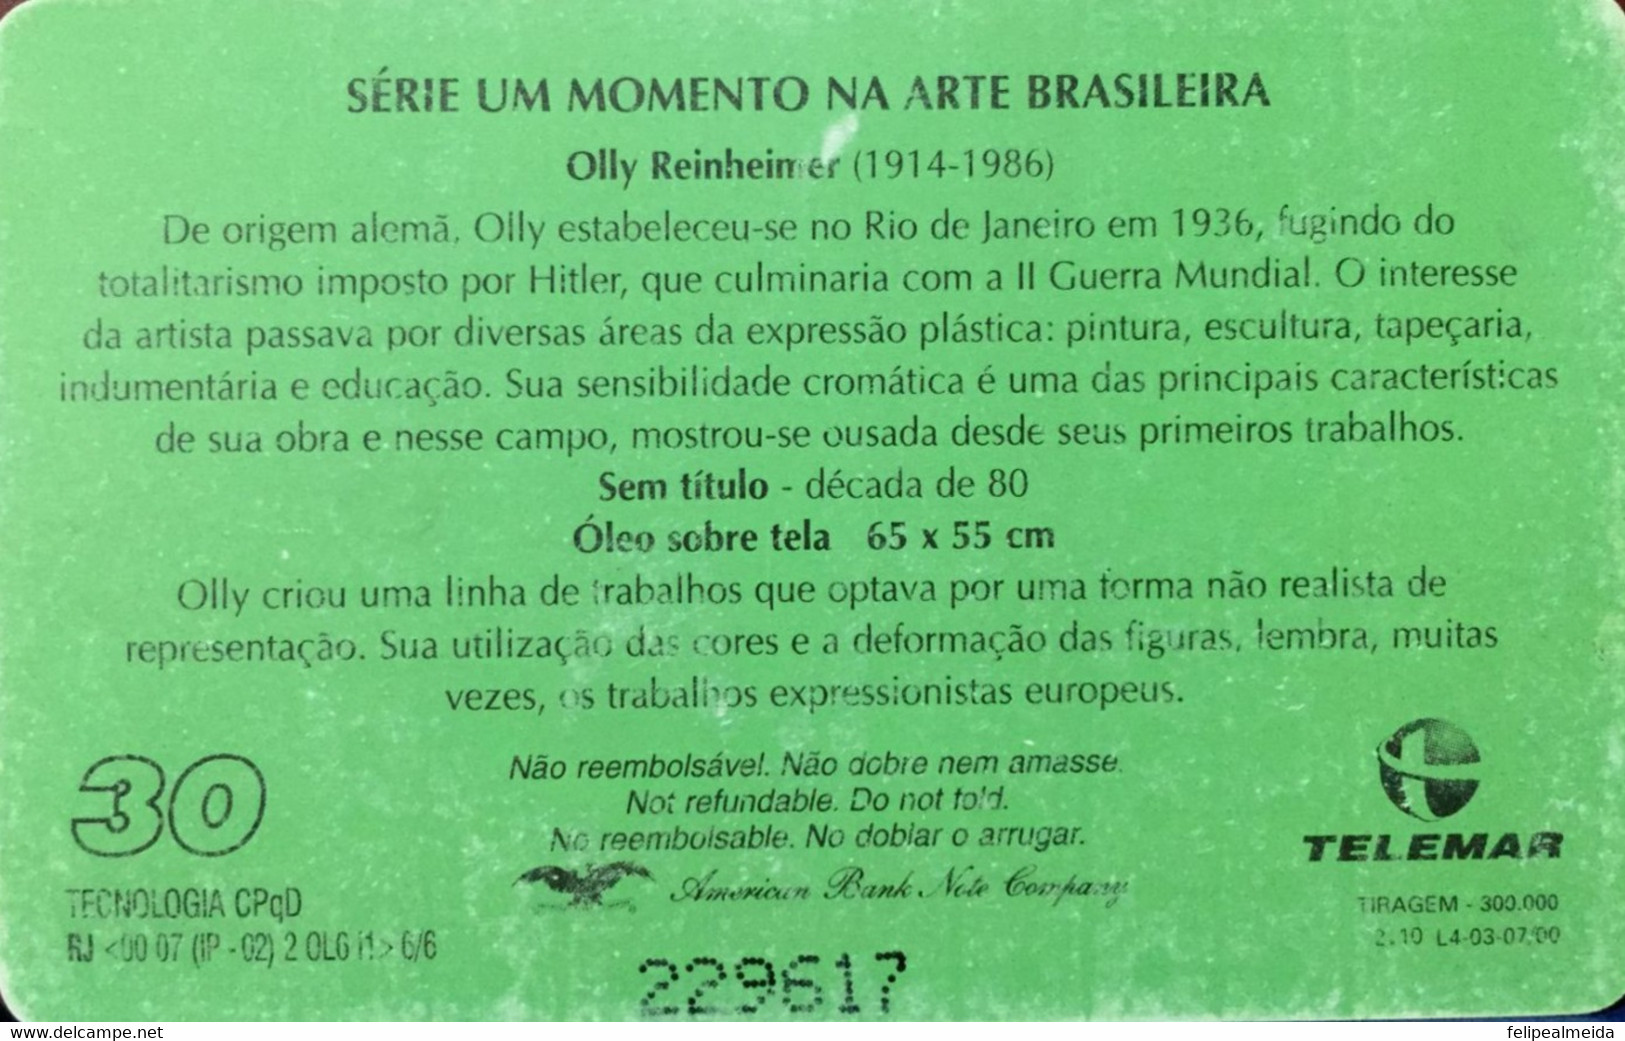 Phone Card Manufactured By Telemar In 2000 - Series A Moment In Brazilian Art - Artist Olly Reinheimeier 1914 To 1986 - Culture